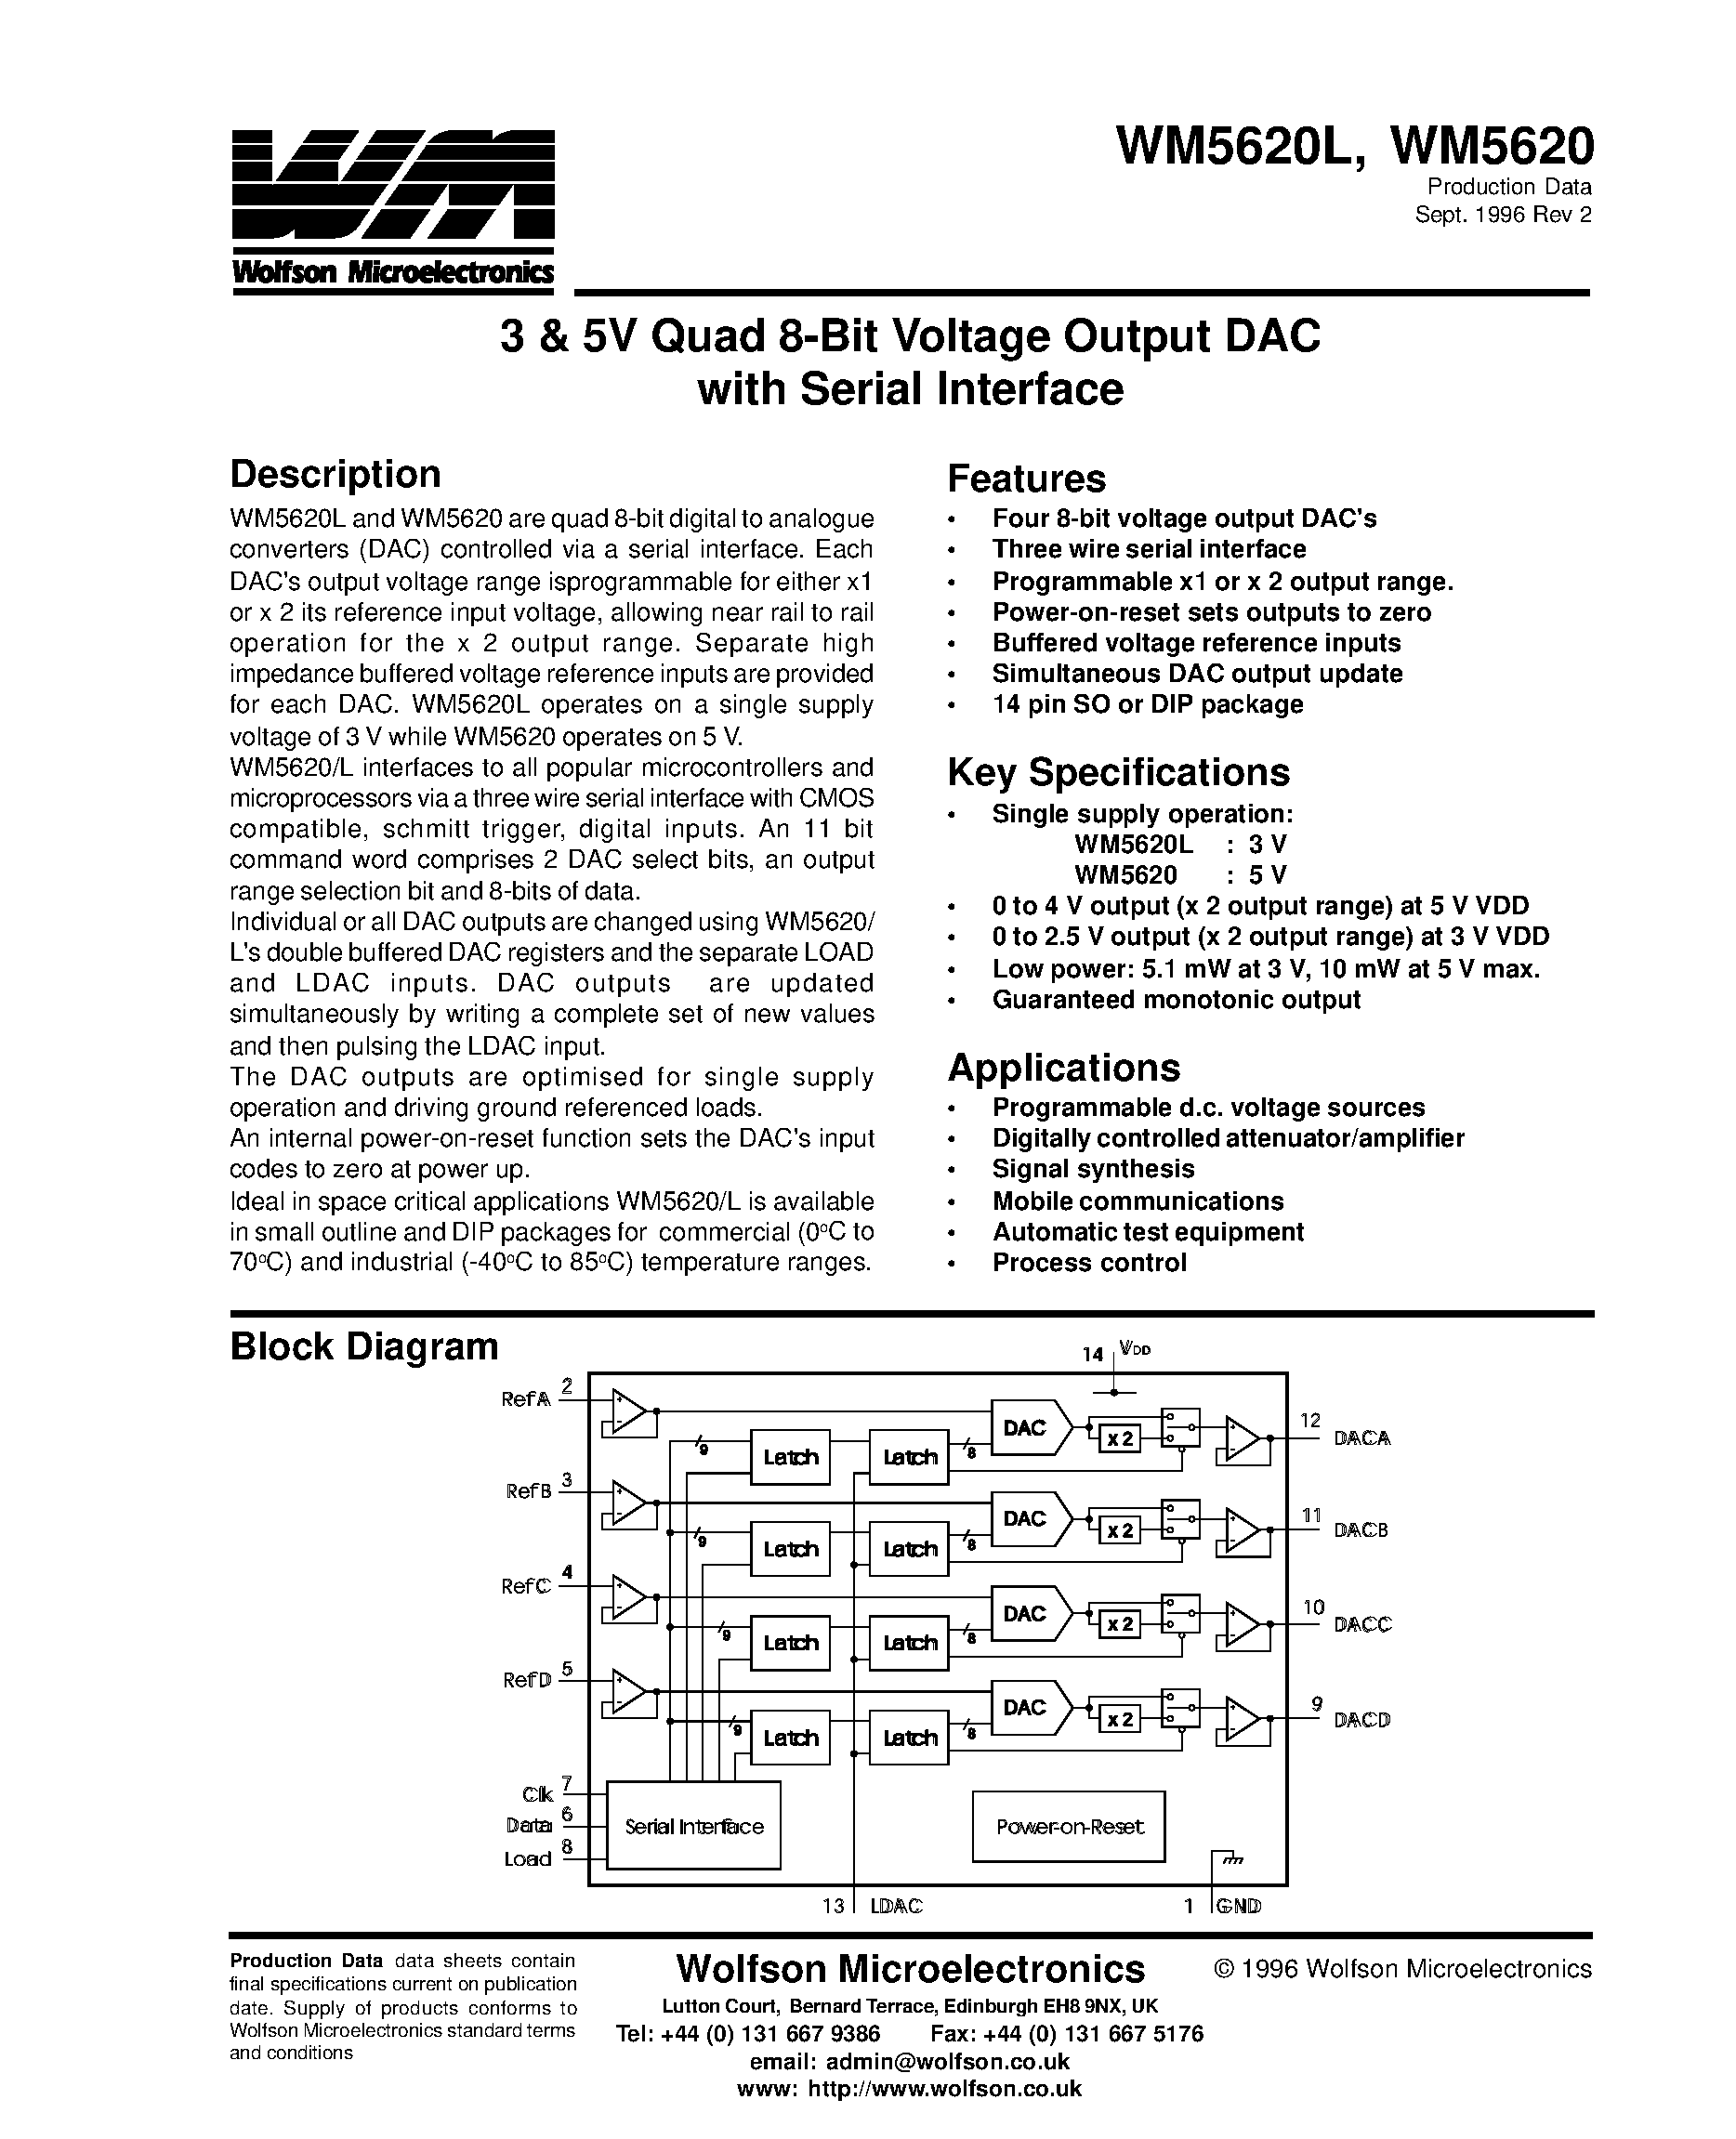 Datasheet WM5620 - 3 & 5V Quad 8-Bit Voltage Output DAC with Serial Interface page 1